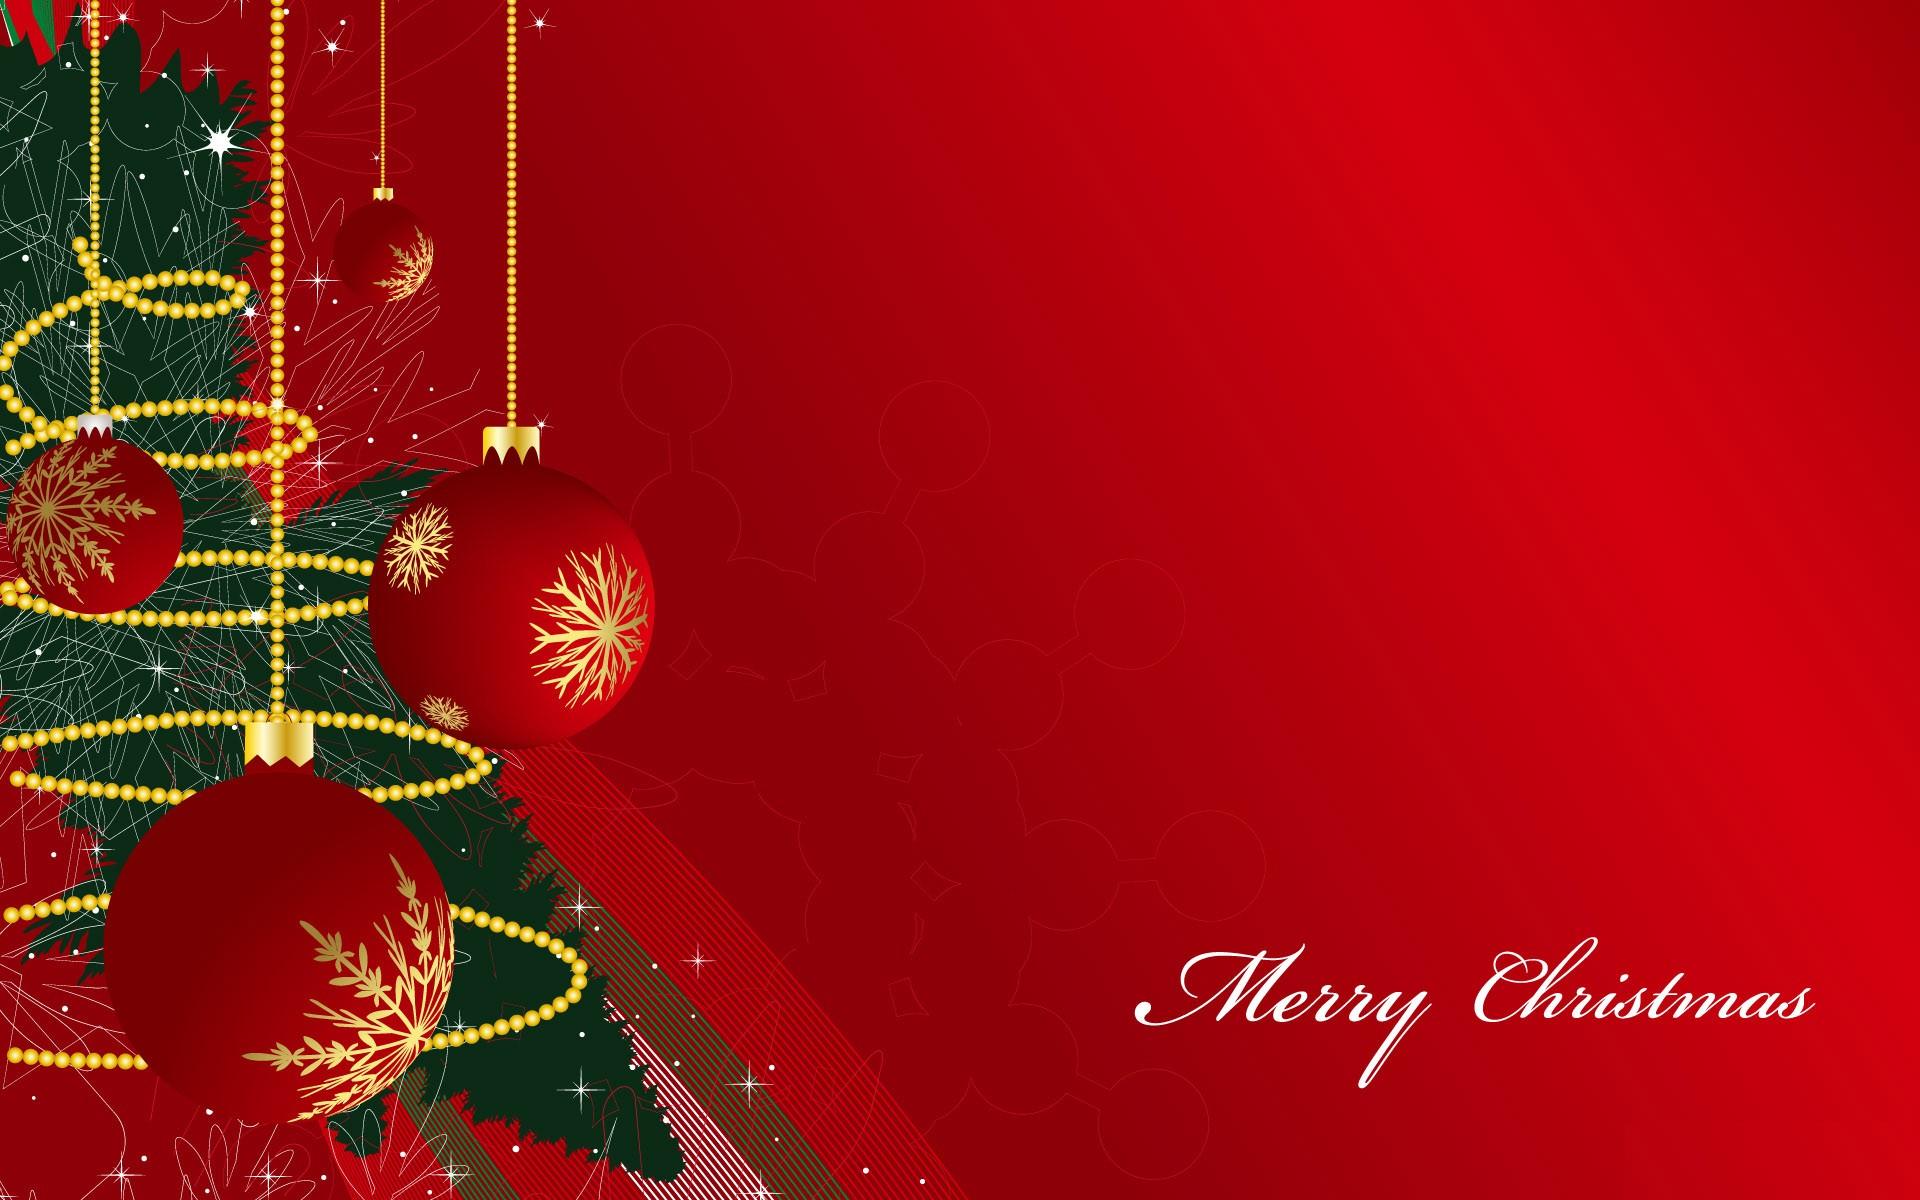 Hd Wallpapers Merry Xmas And Happy New Year - Christmas - HD Wallpaper 